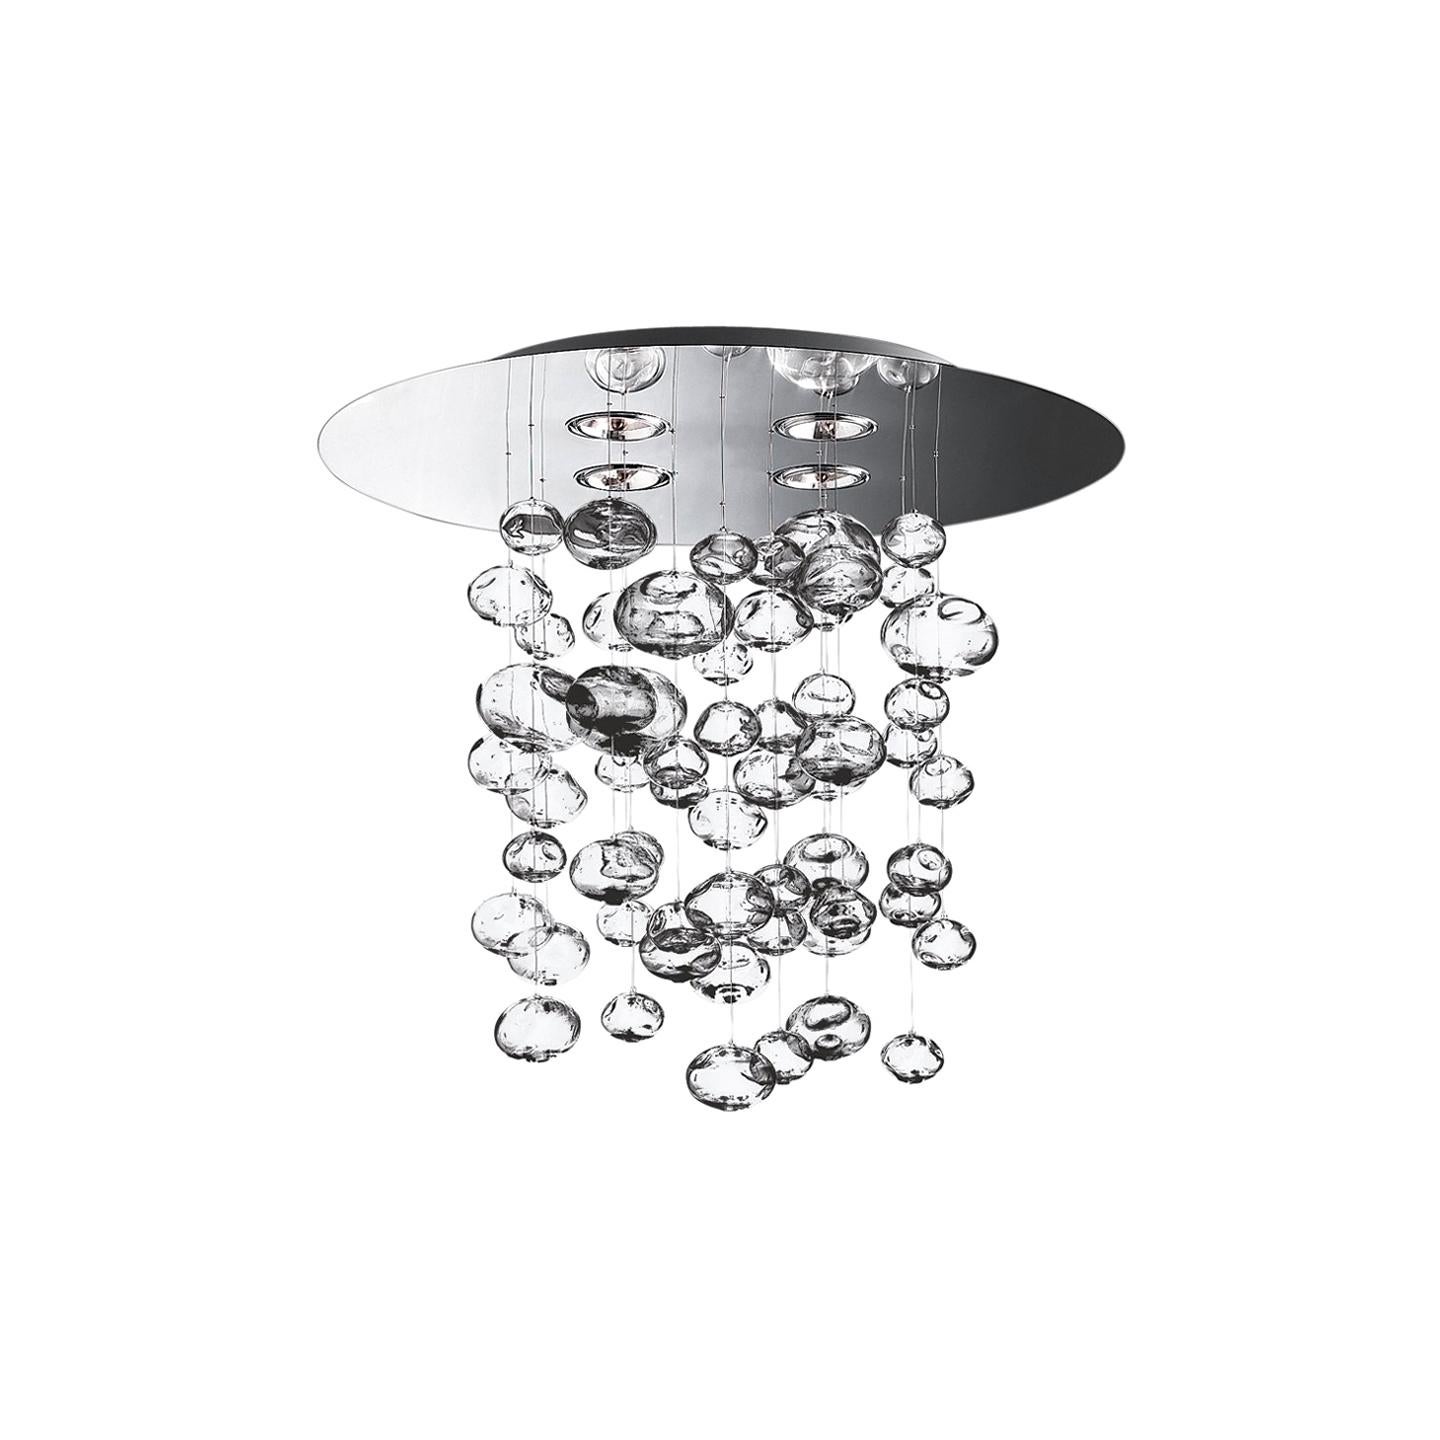 Leucos Ether S 90 Chandelier in Transparent and Polished Steel by Patrick Jouin For Sale